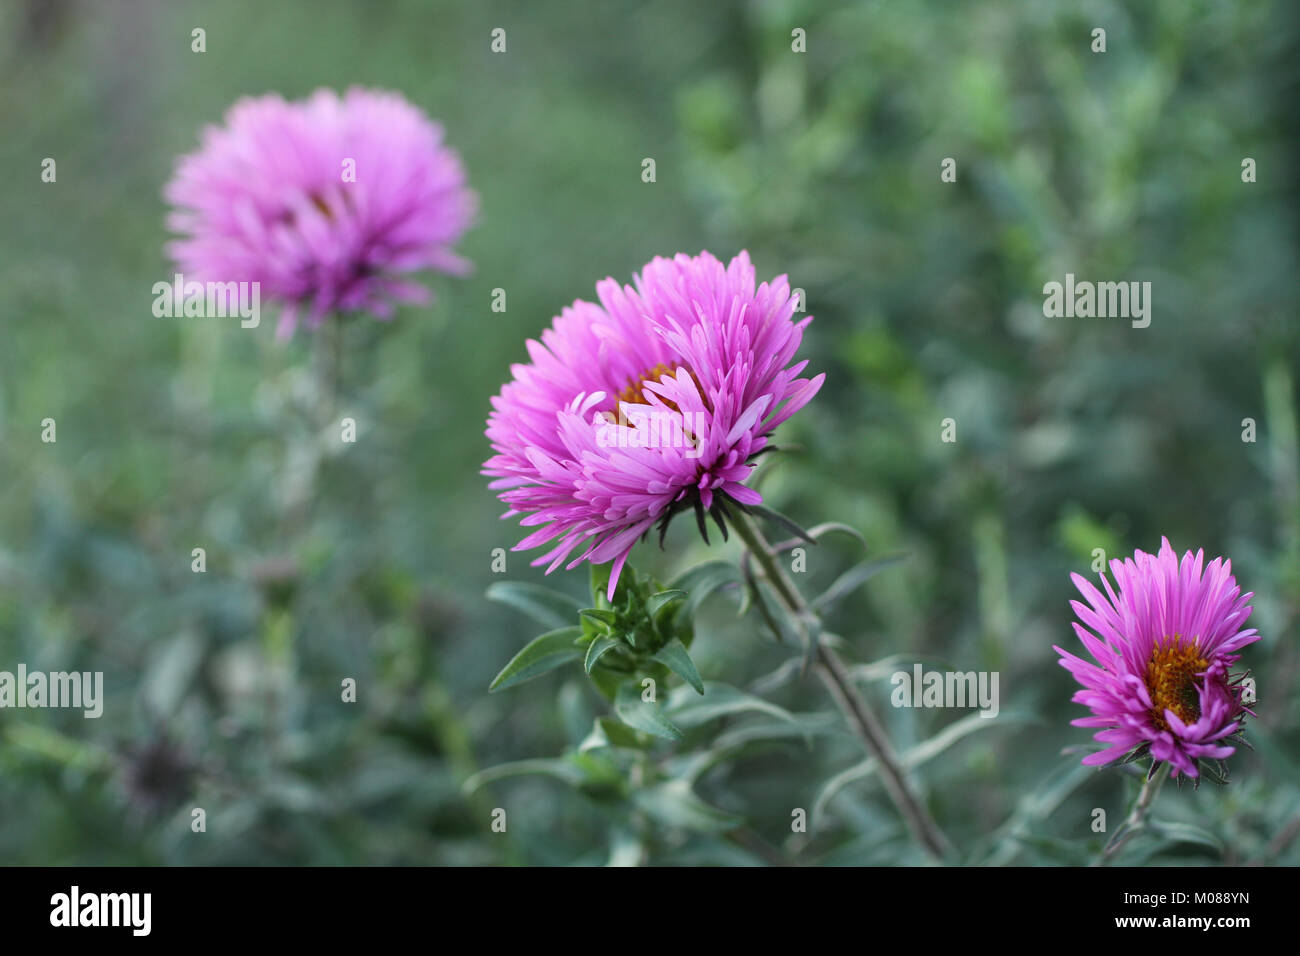 Purple  flowers  against green grass background Stock Photo